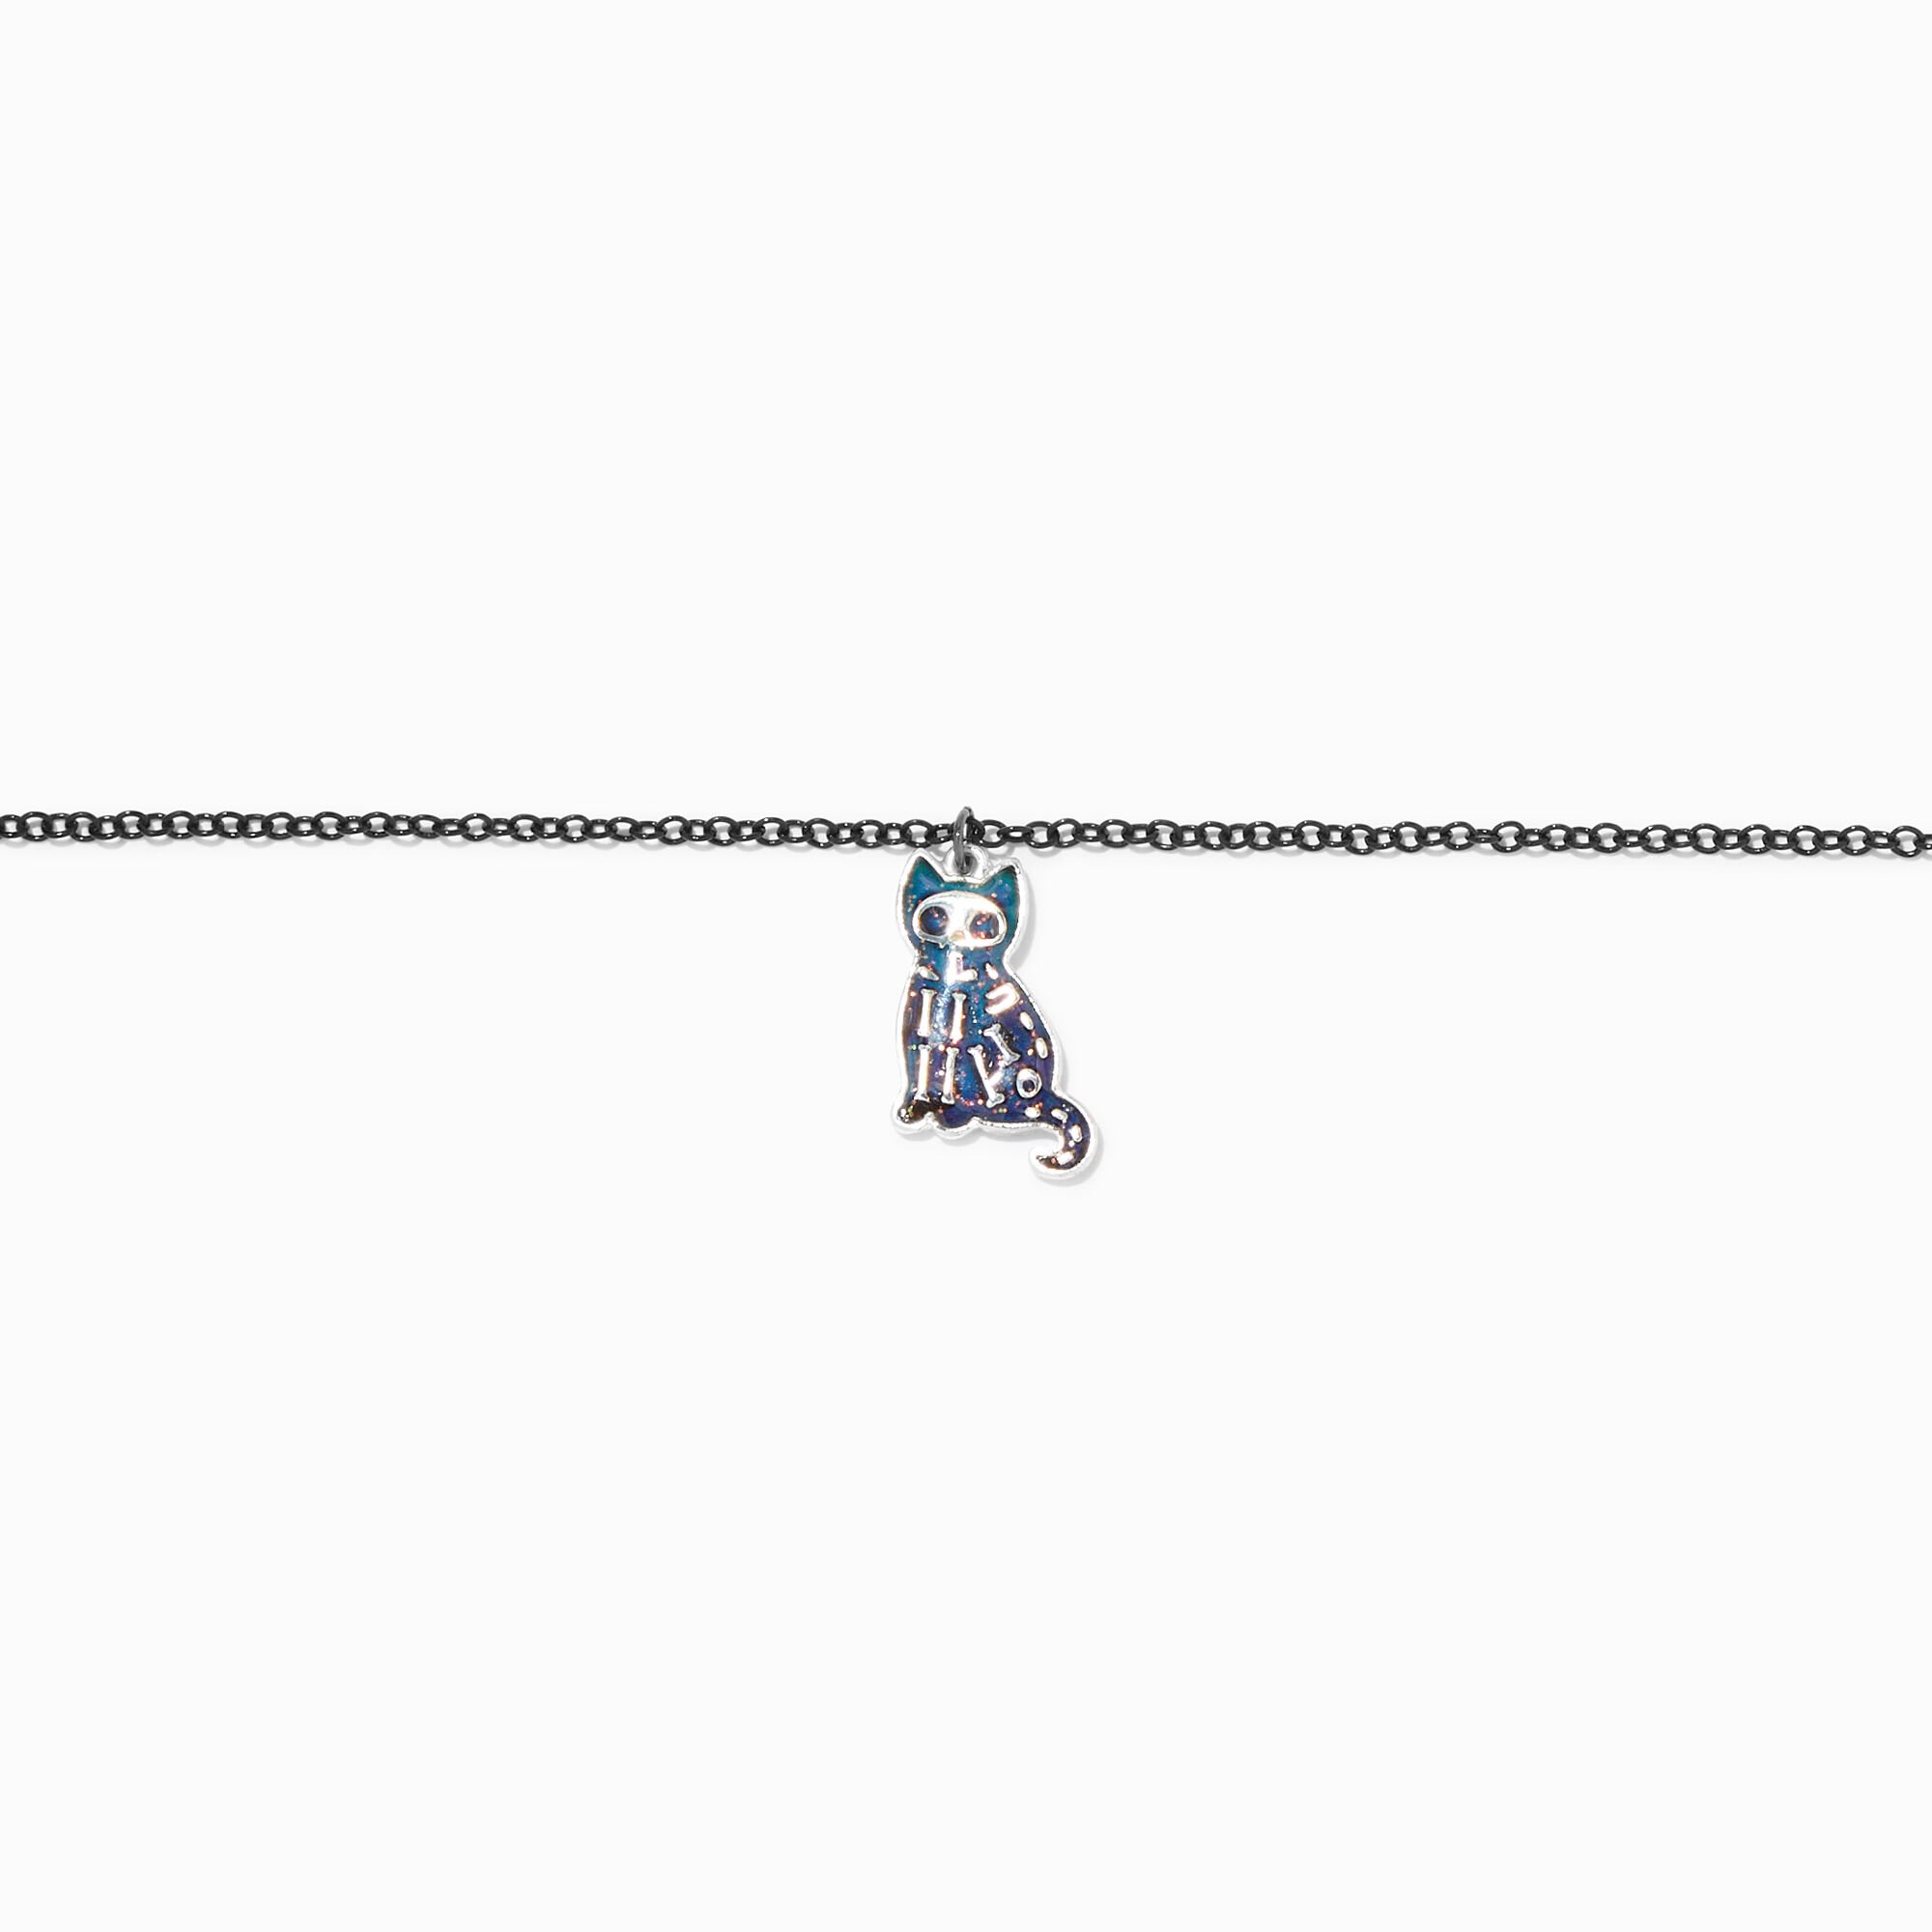 View Claires Mood Skeleton Cat Pendant Choker Necklace Silver information